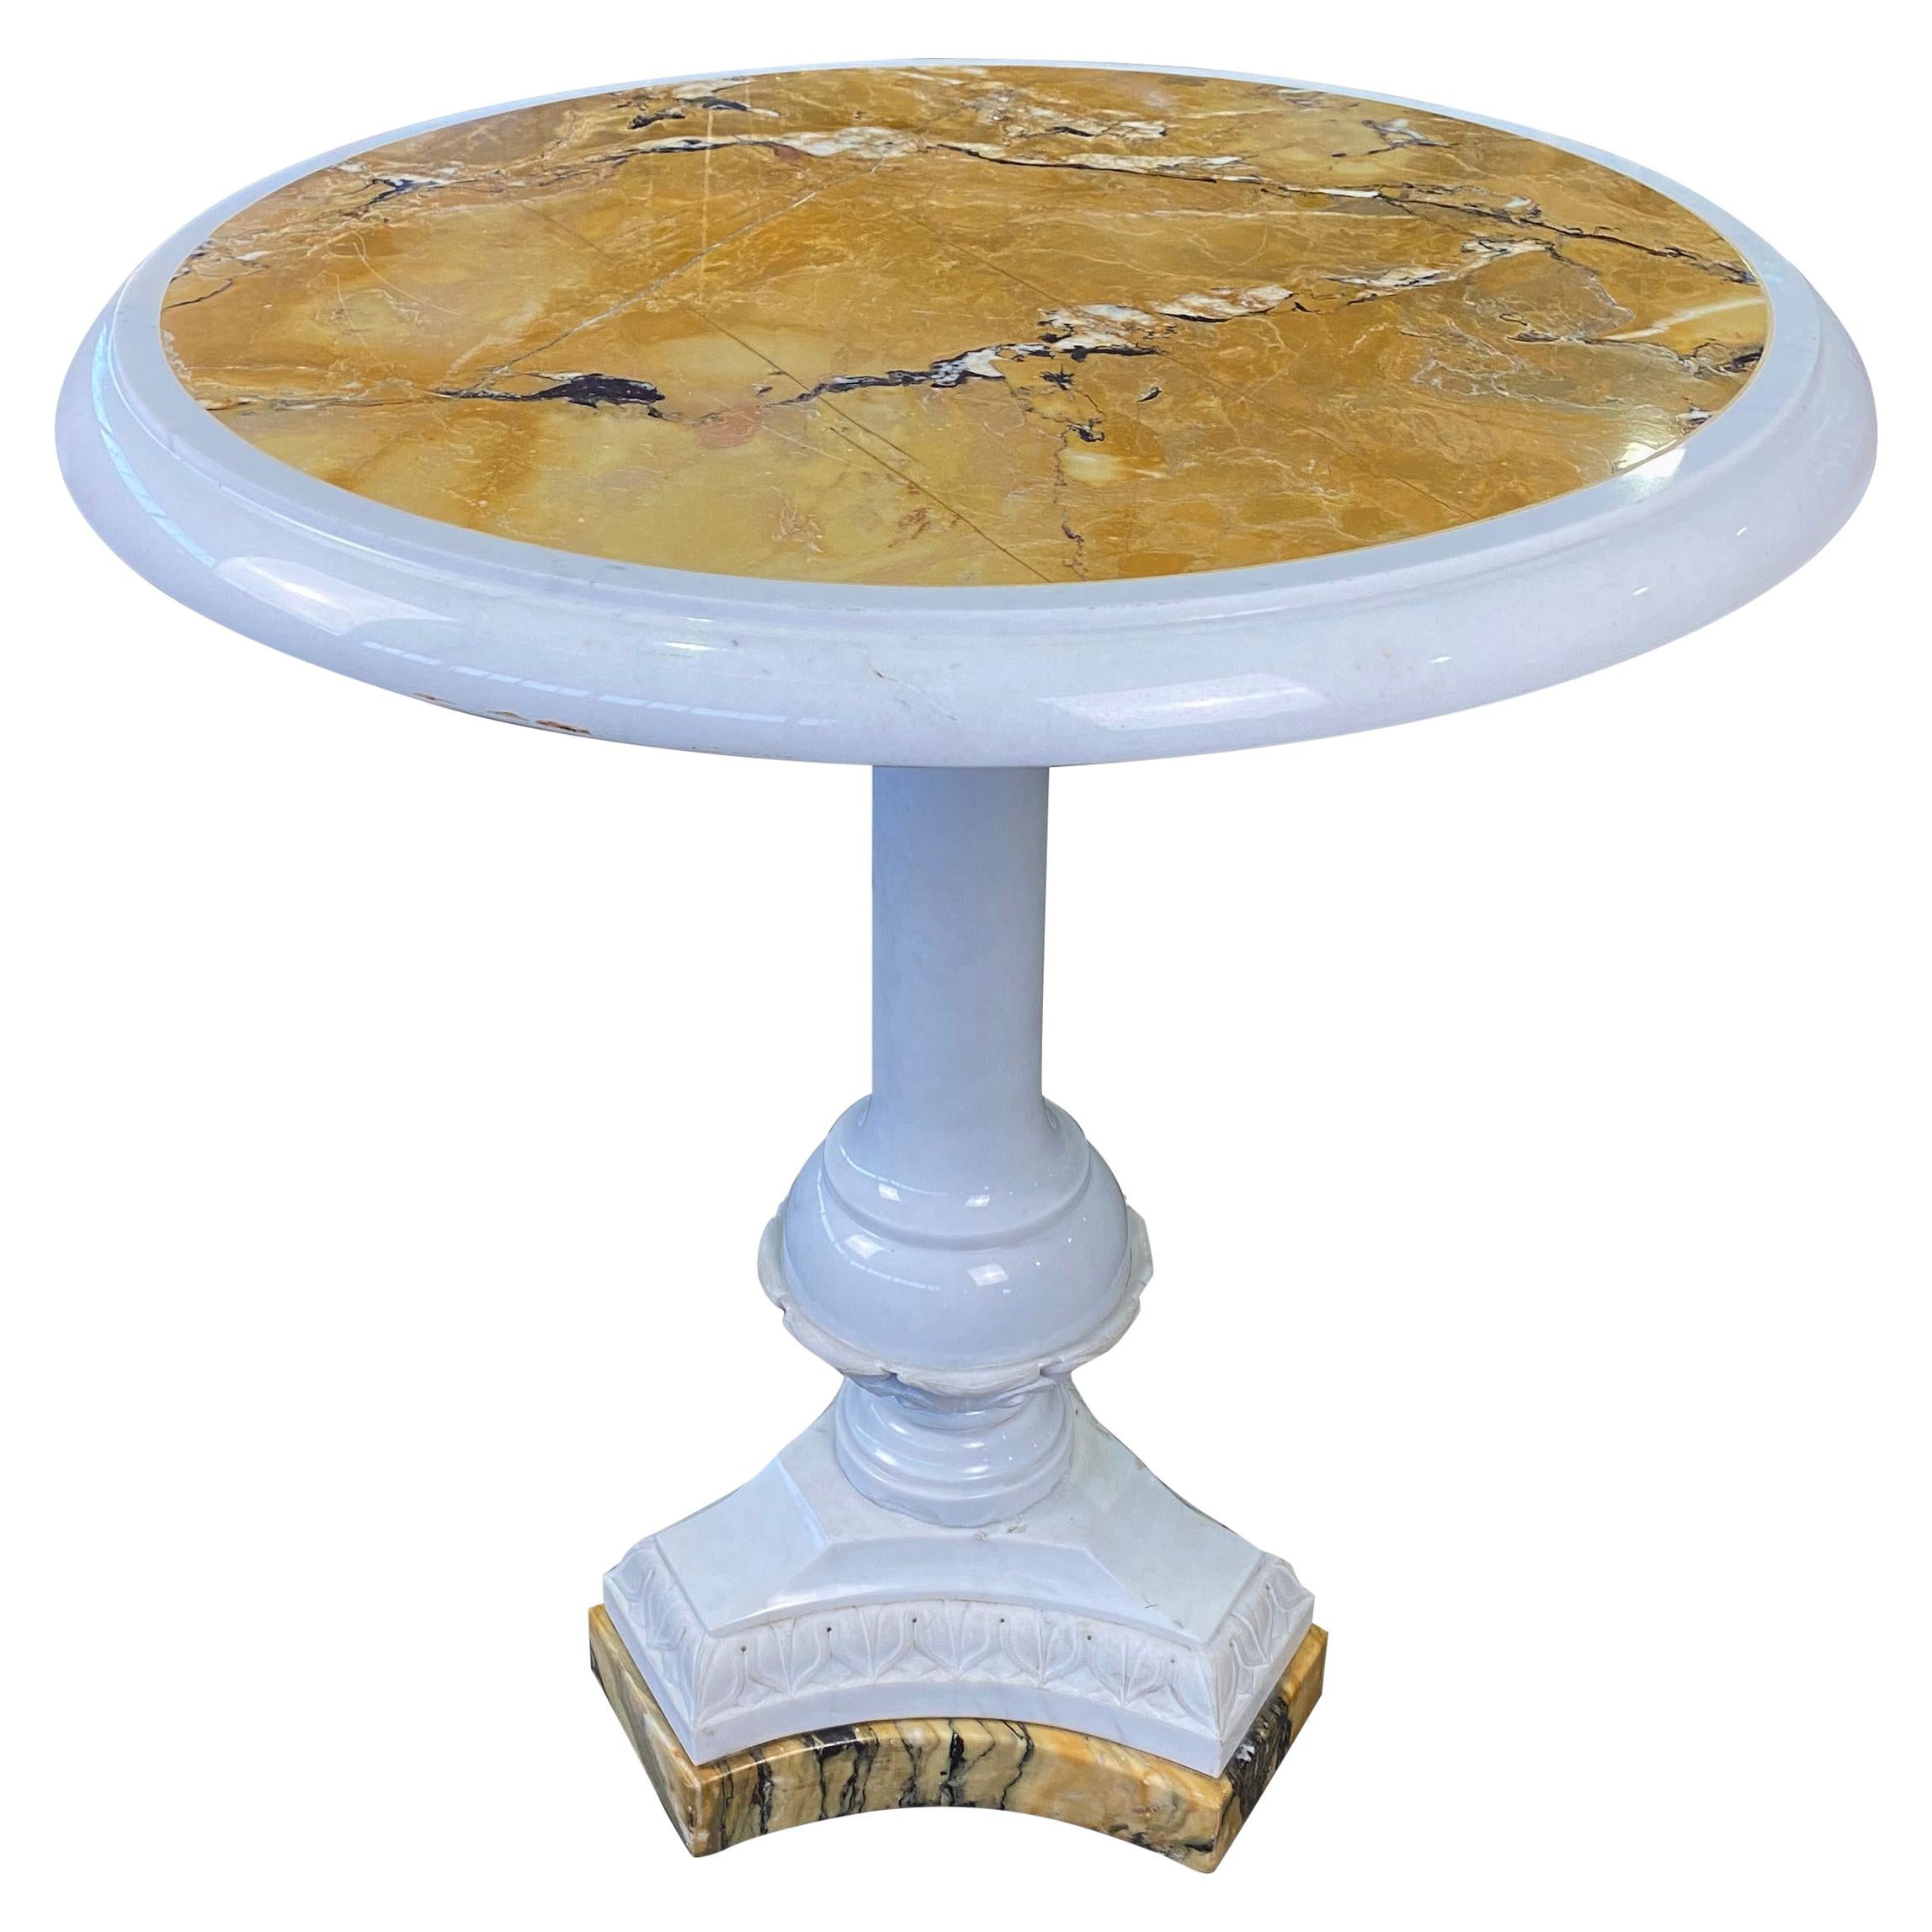 Italian White Statuary and Sienna Marble Table, 19th-20th Century For Sale